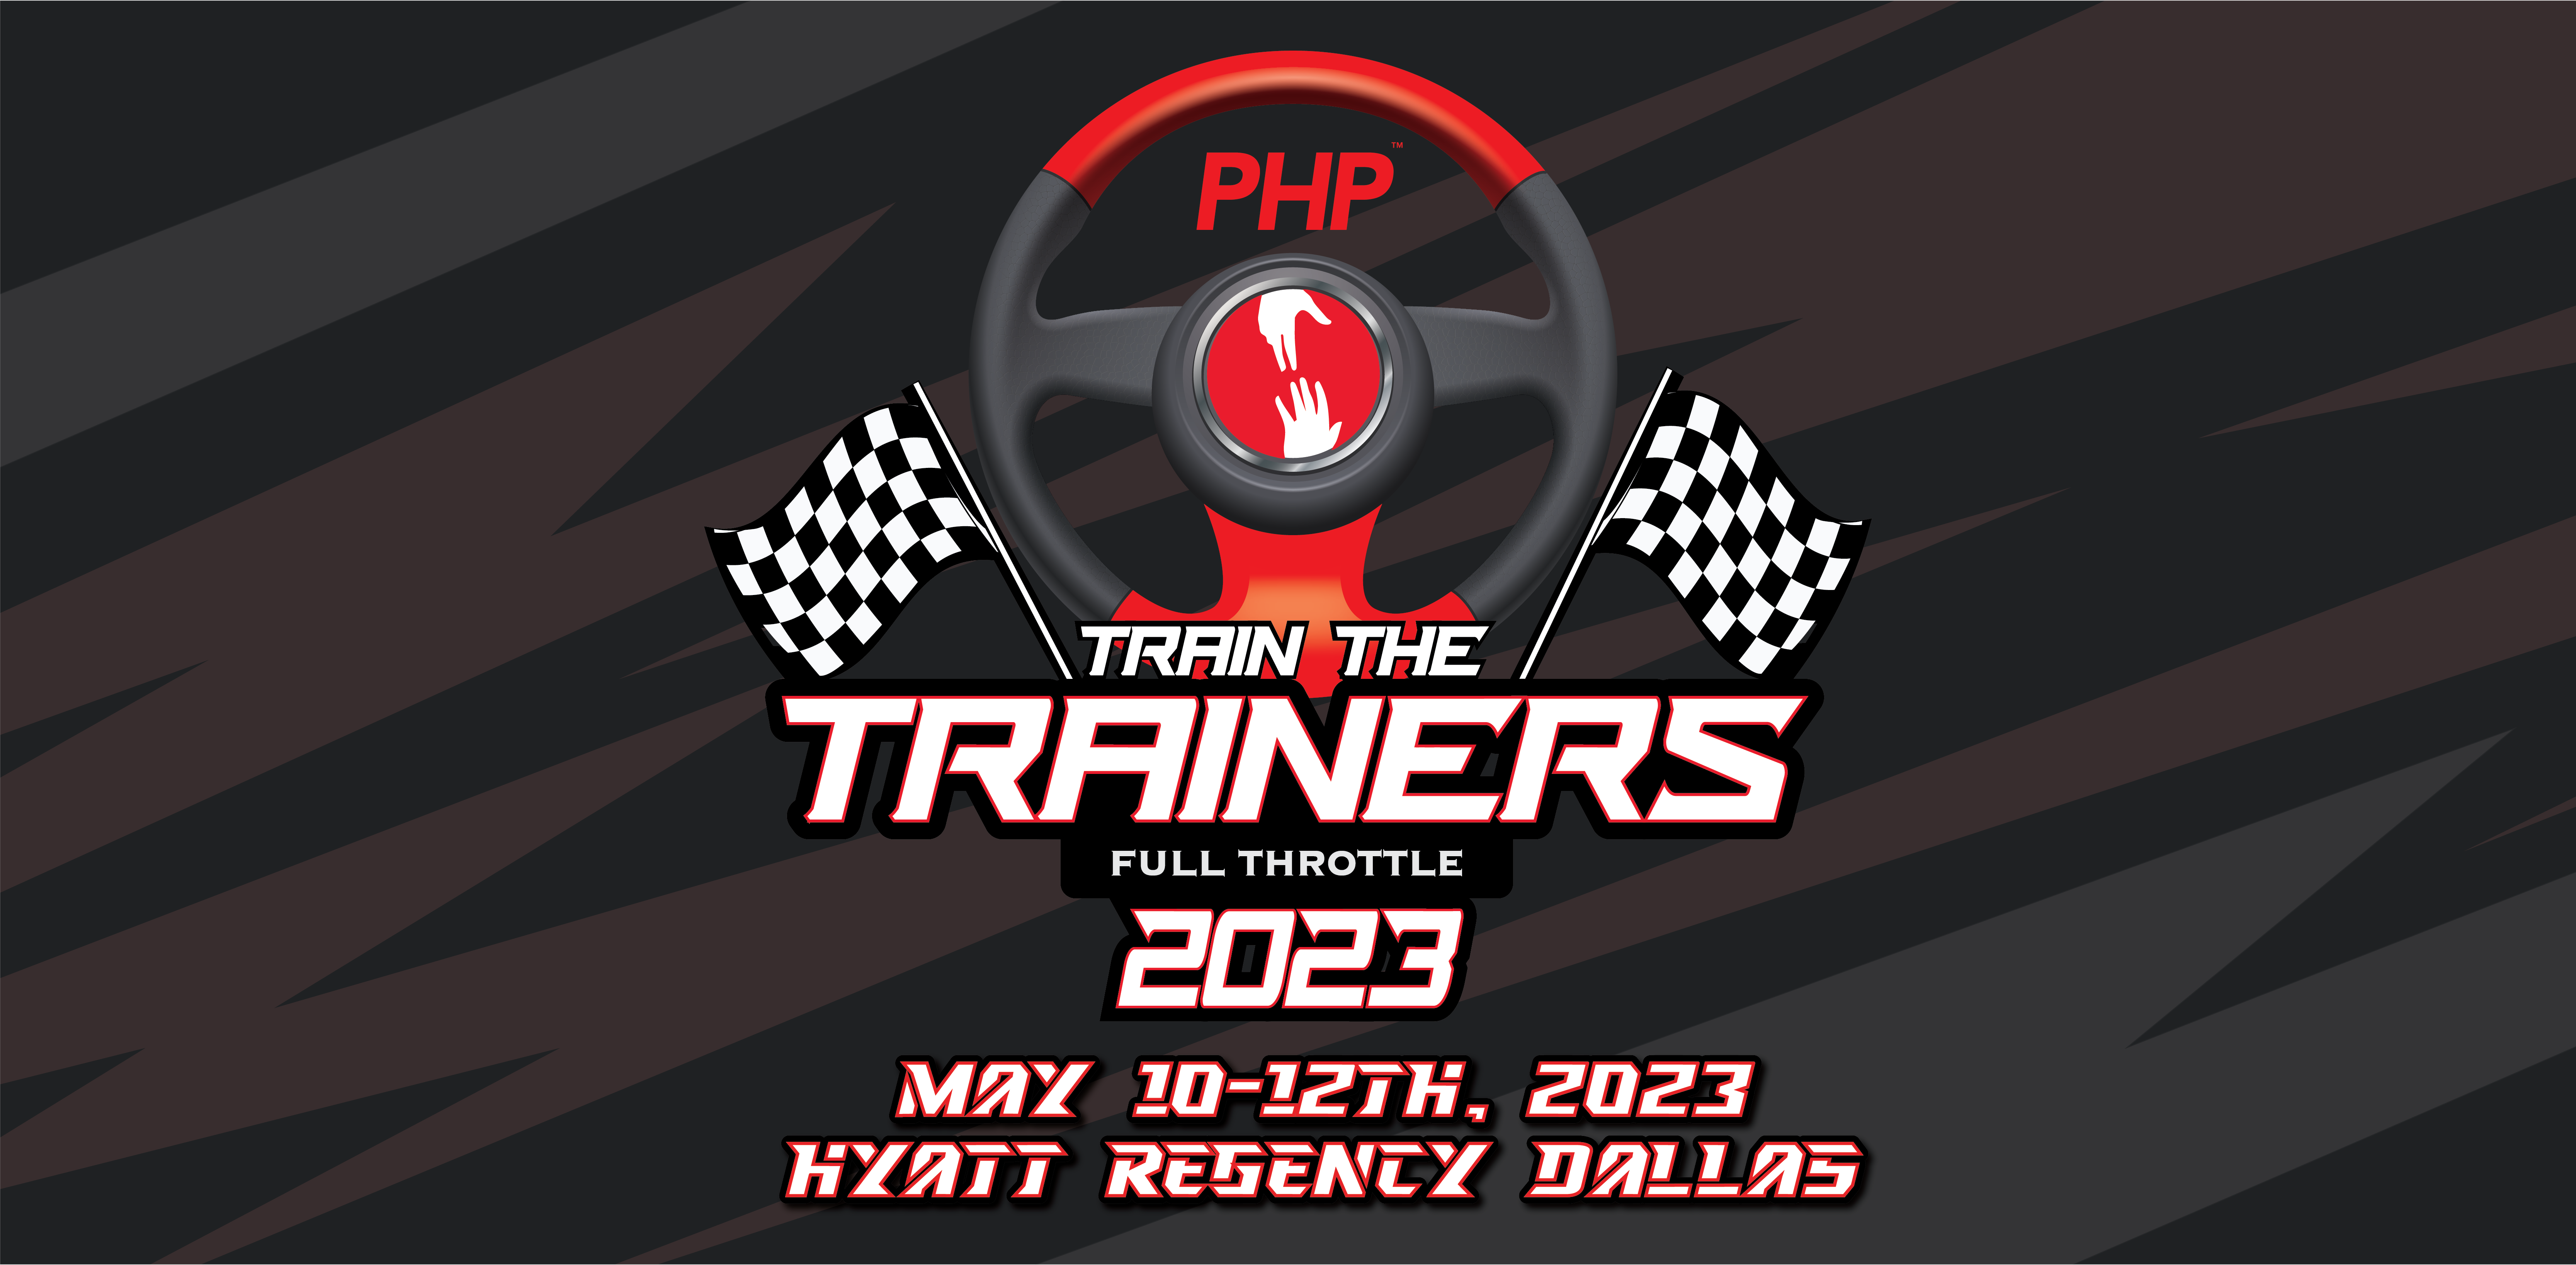 PHP Train the Trainers 2023